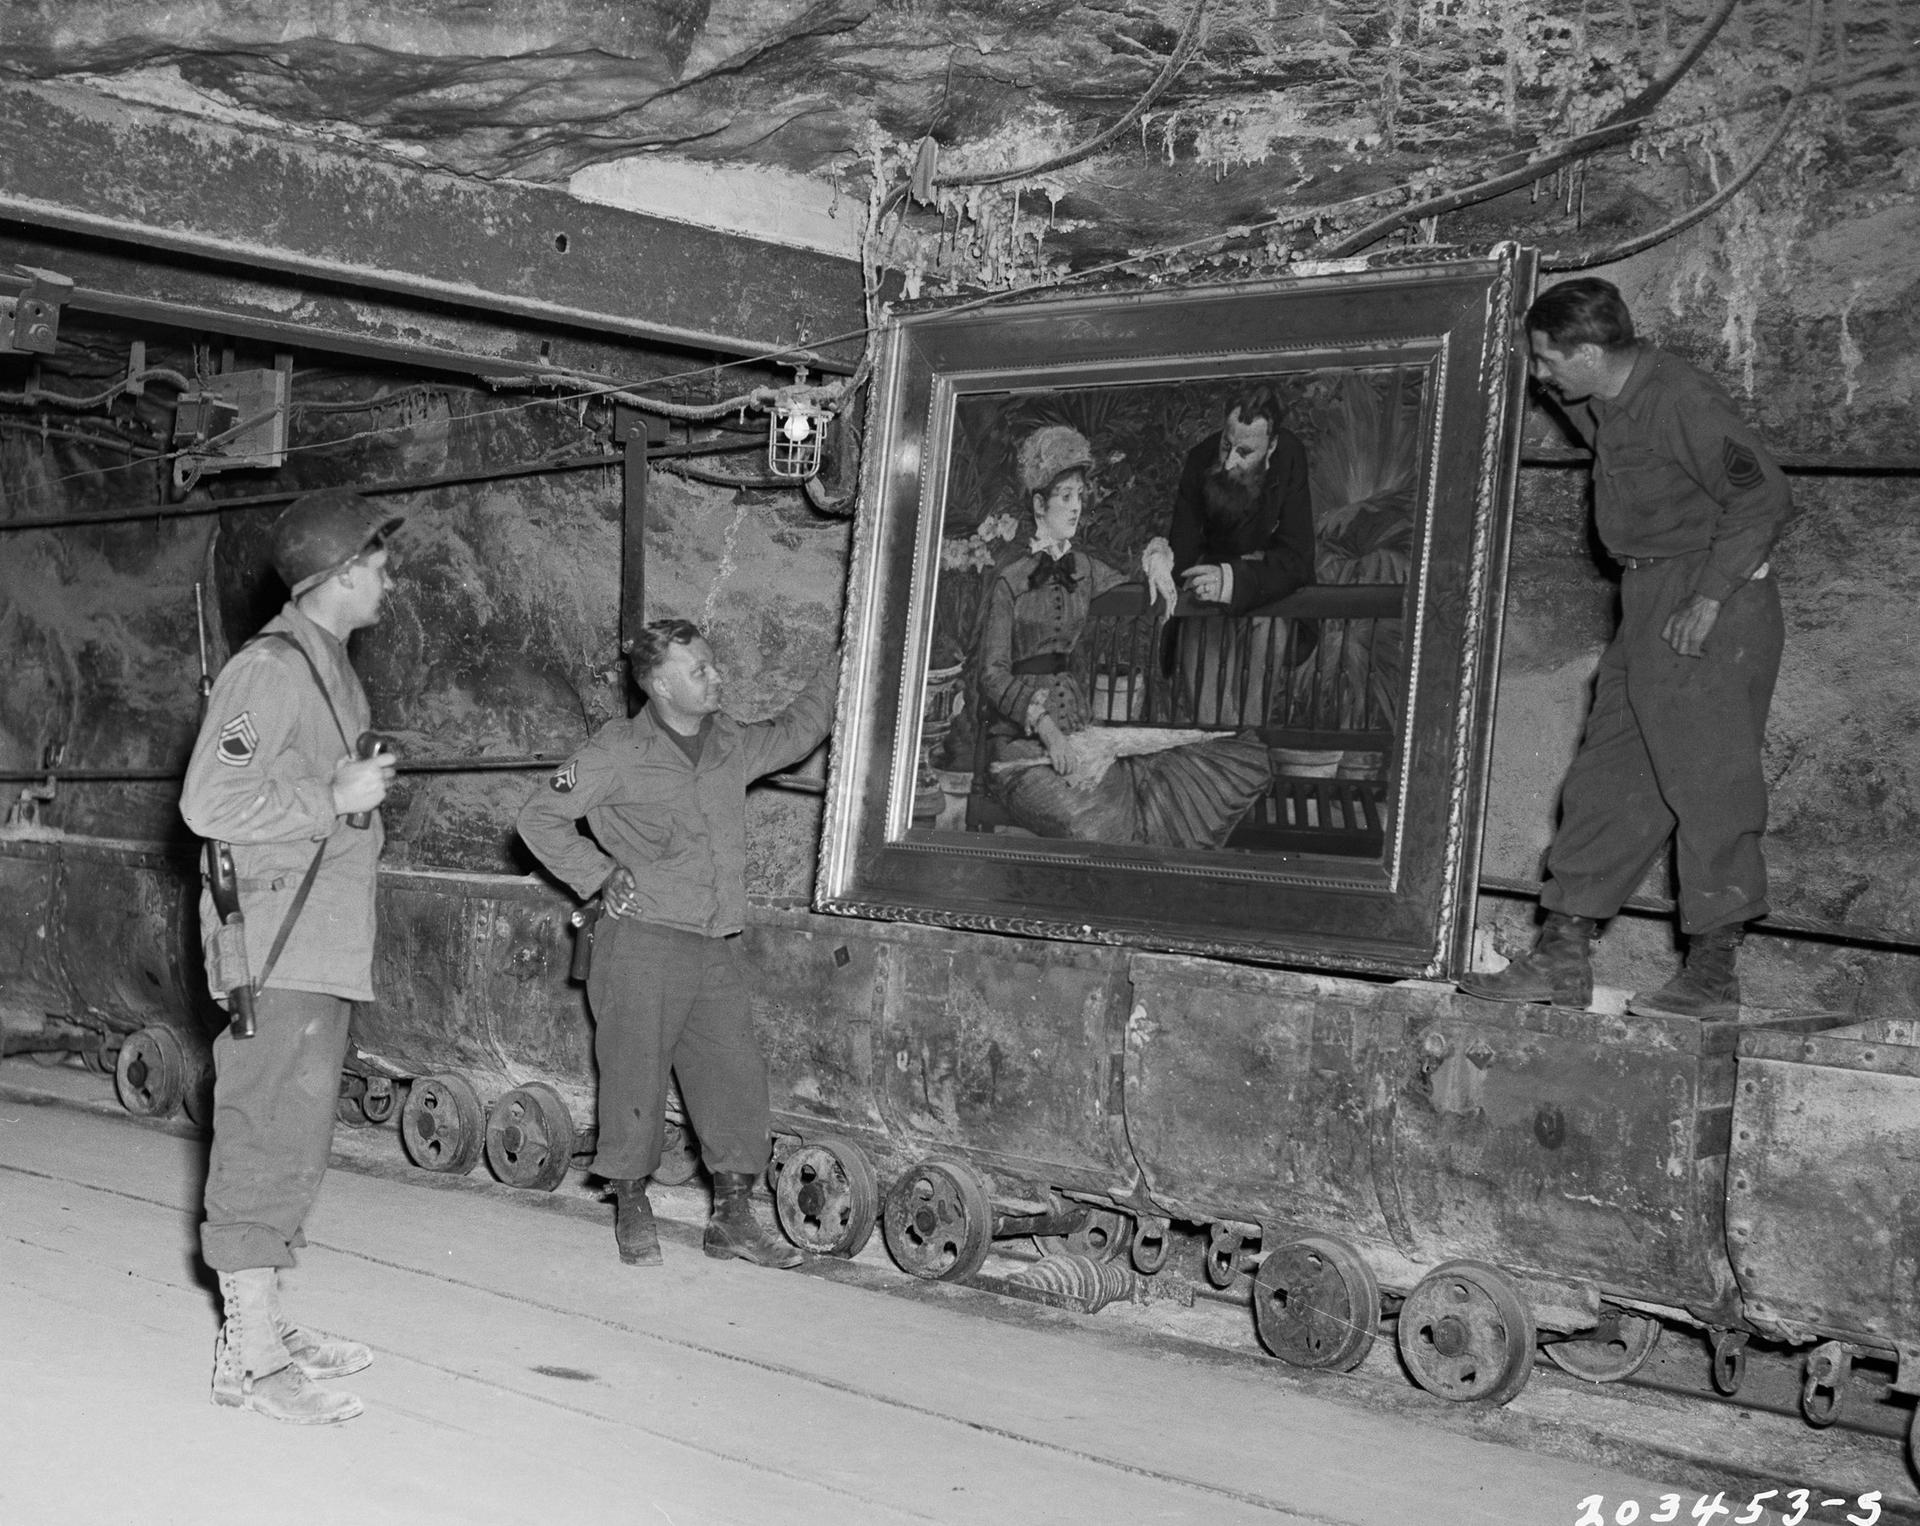 U.S. soldiers examine the painting, "Wintergarden," by French Impressionist painter Edouard Manet, stolen by the Nazi regime and hidden in a salt mine in Merkers, Germany April 15, 1945. 